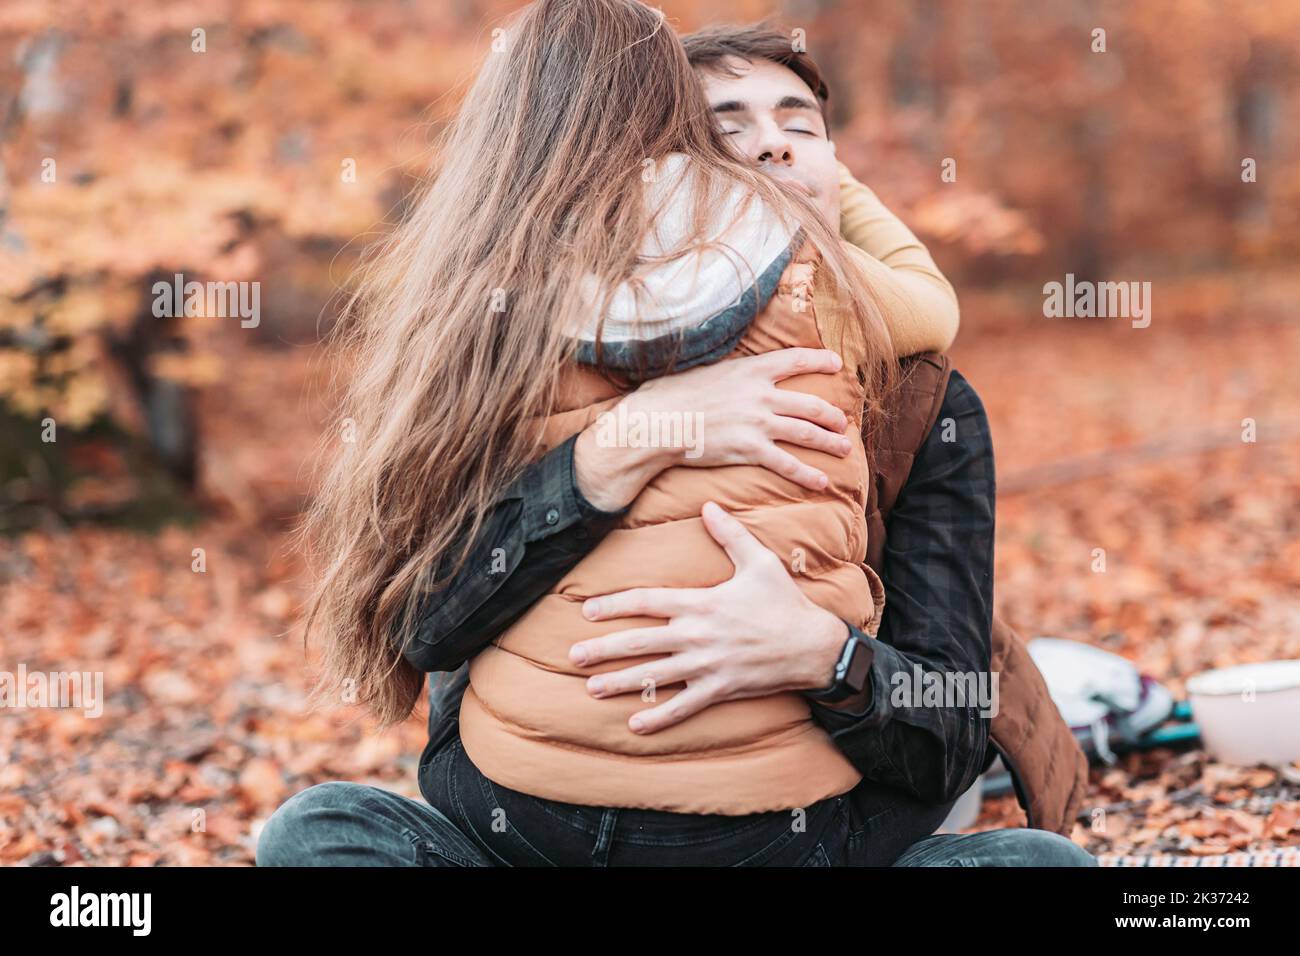 Incredible Compilation of Over 999 Tight Hug Photos - Stunning Collection  in Full 4K Resolution